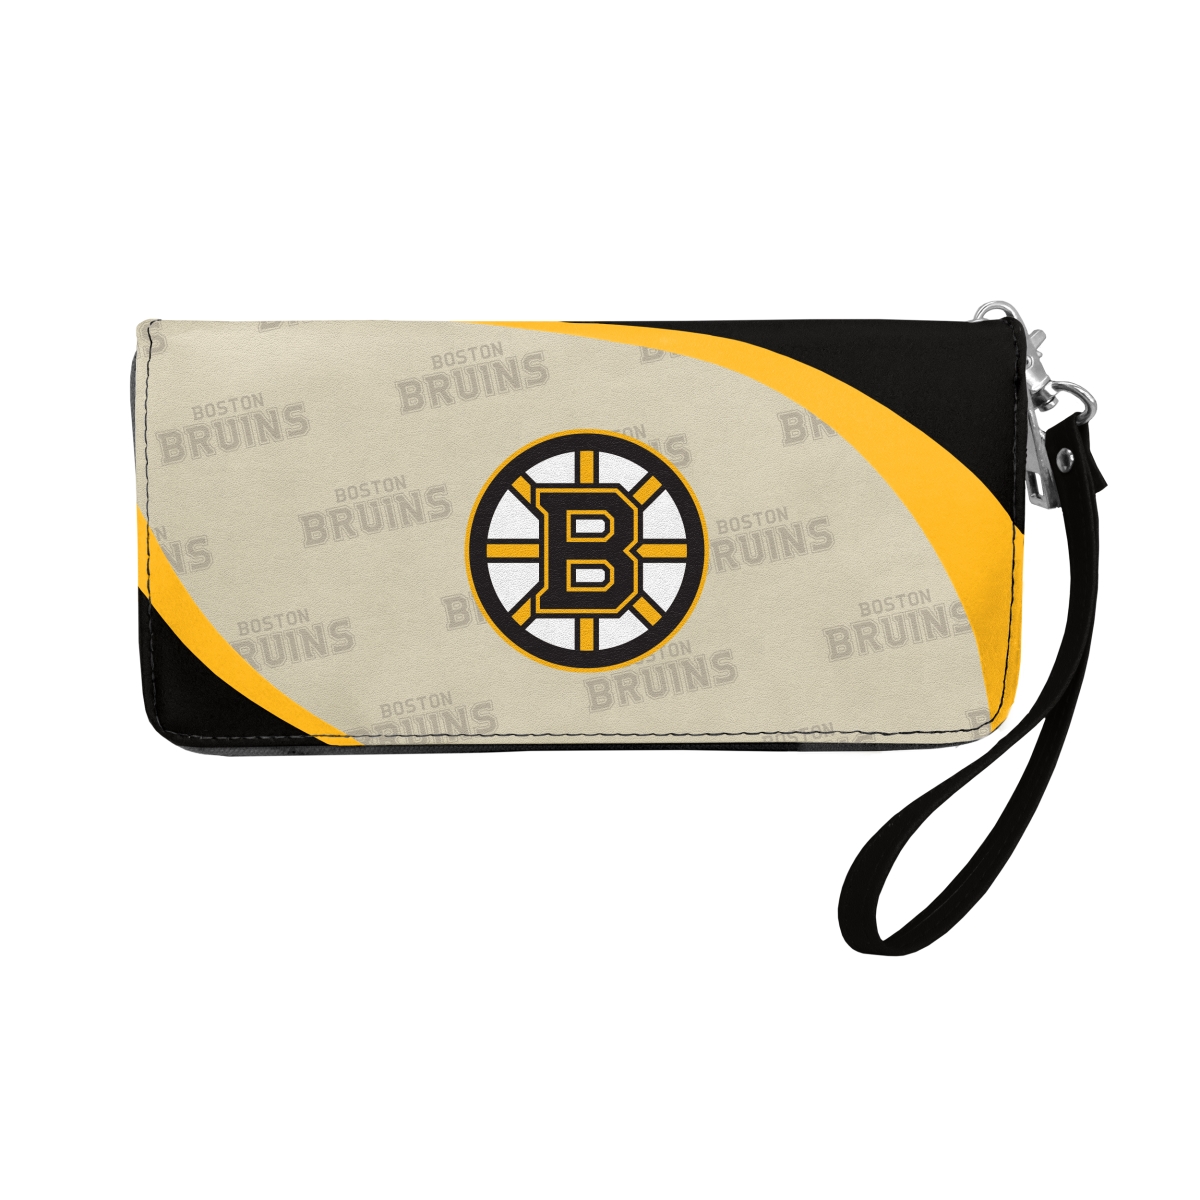 Picture of Little Earth 500902-BRUN NHL Boston Bruins Curve Zip Organizer Wallet